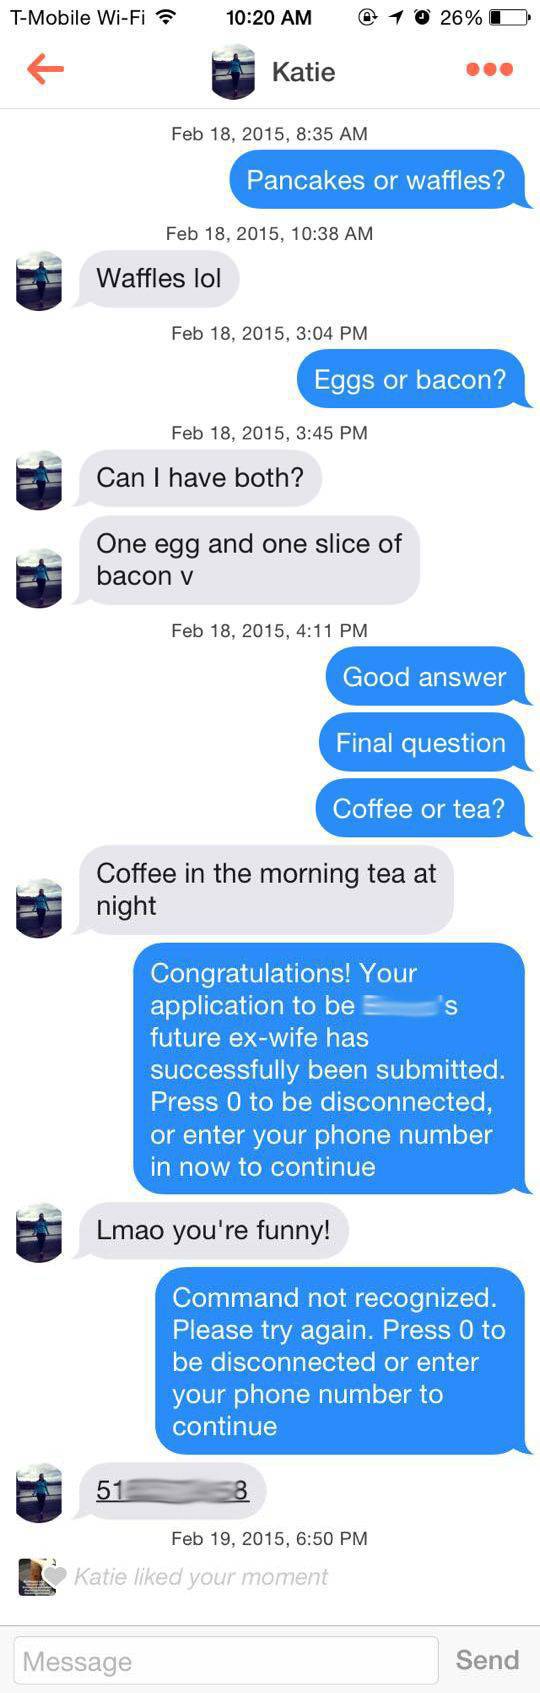 guy finds perfect way to pick up chicks on tinder